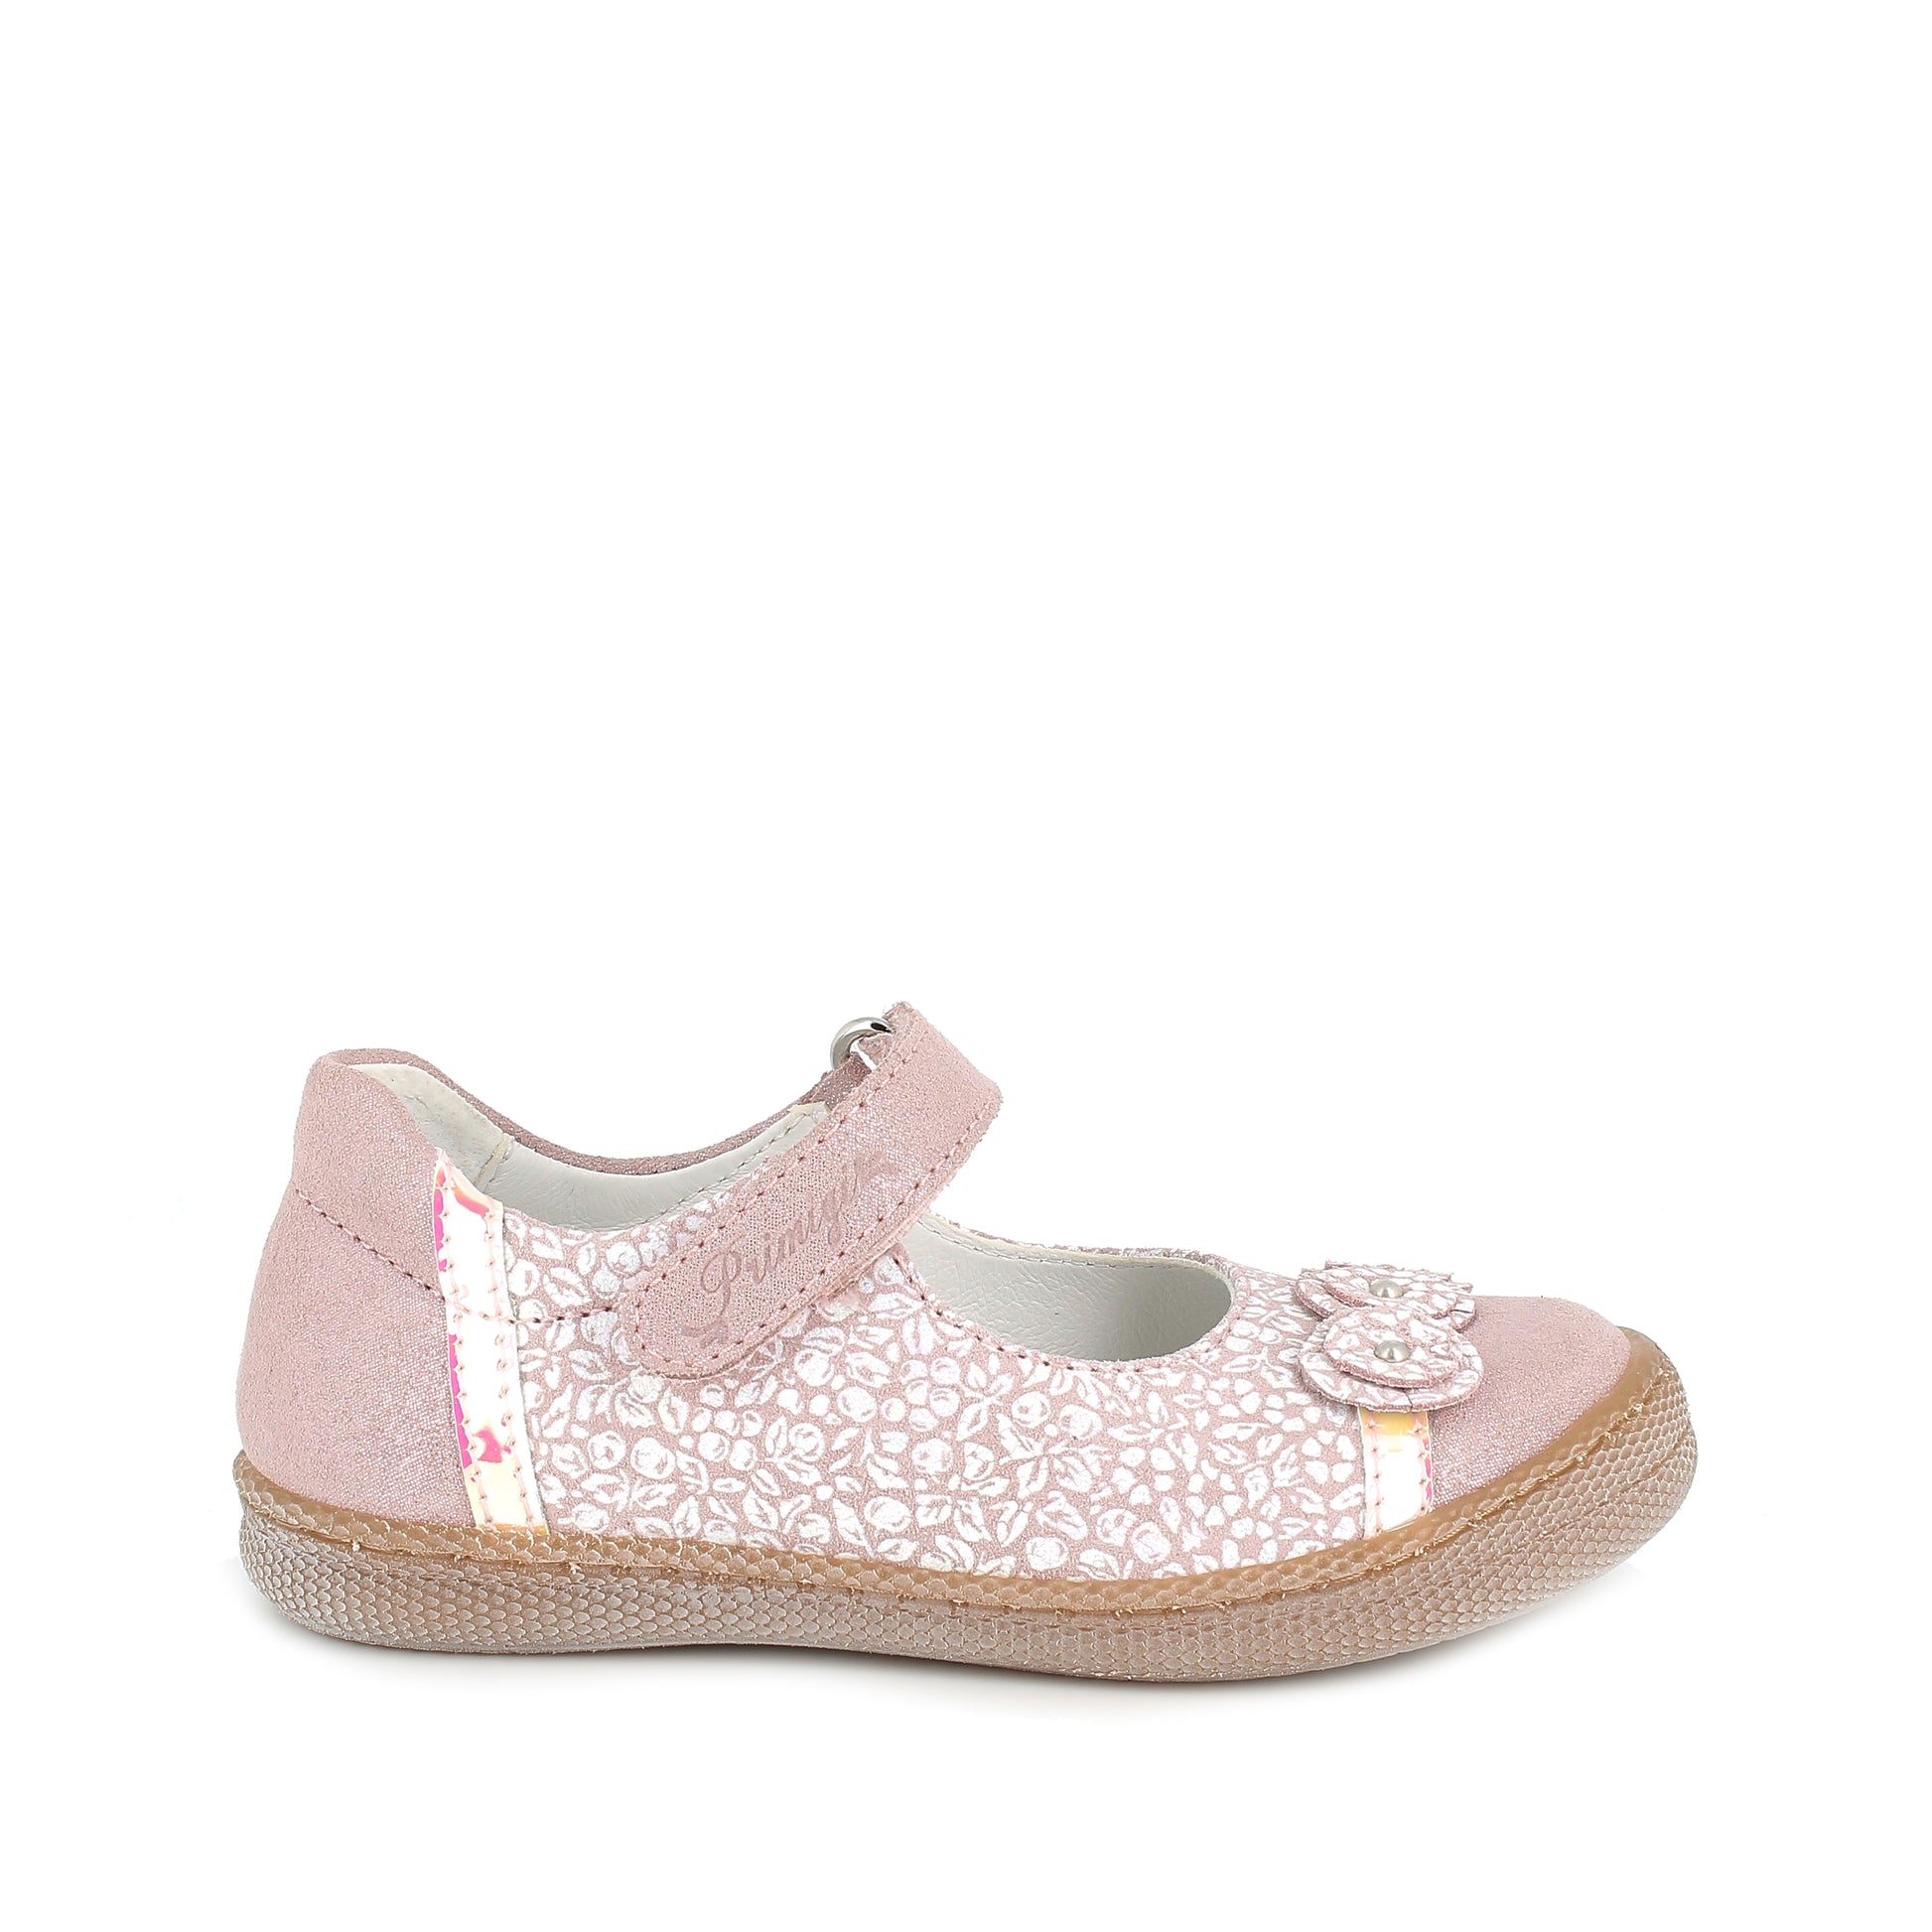 A girls Mary Jane shoe by Primigi, style 3916800, in pink/white floral print leather with velcro fastening. Right side view.